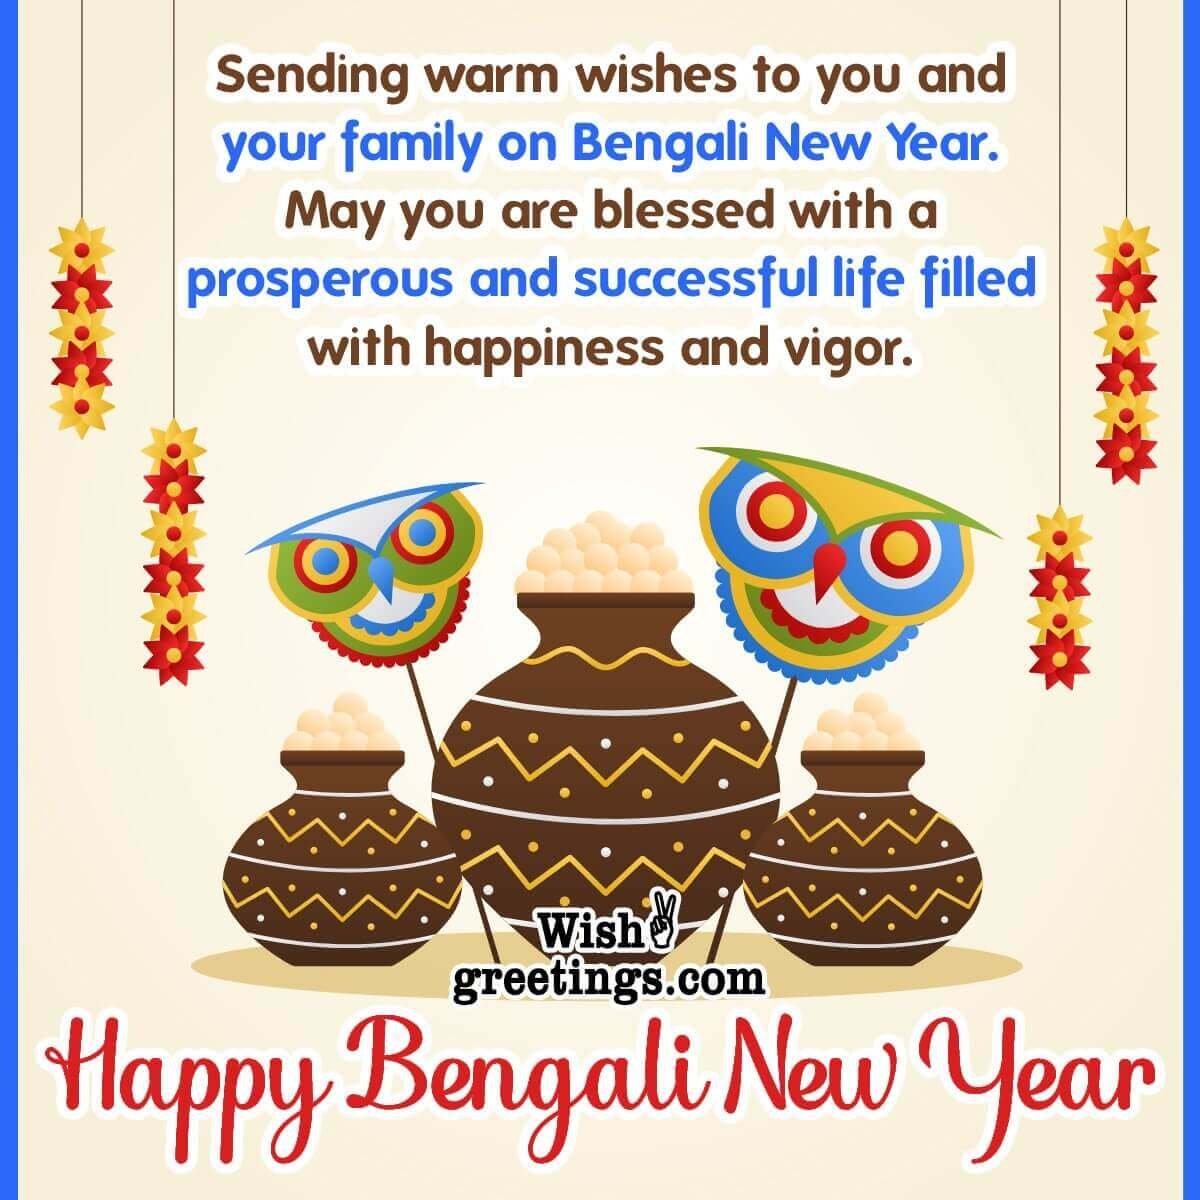 Bengali New Year Wishes Messages Wish Greetings